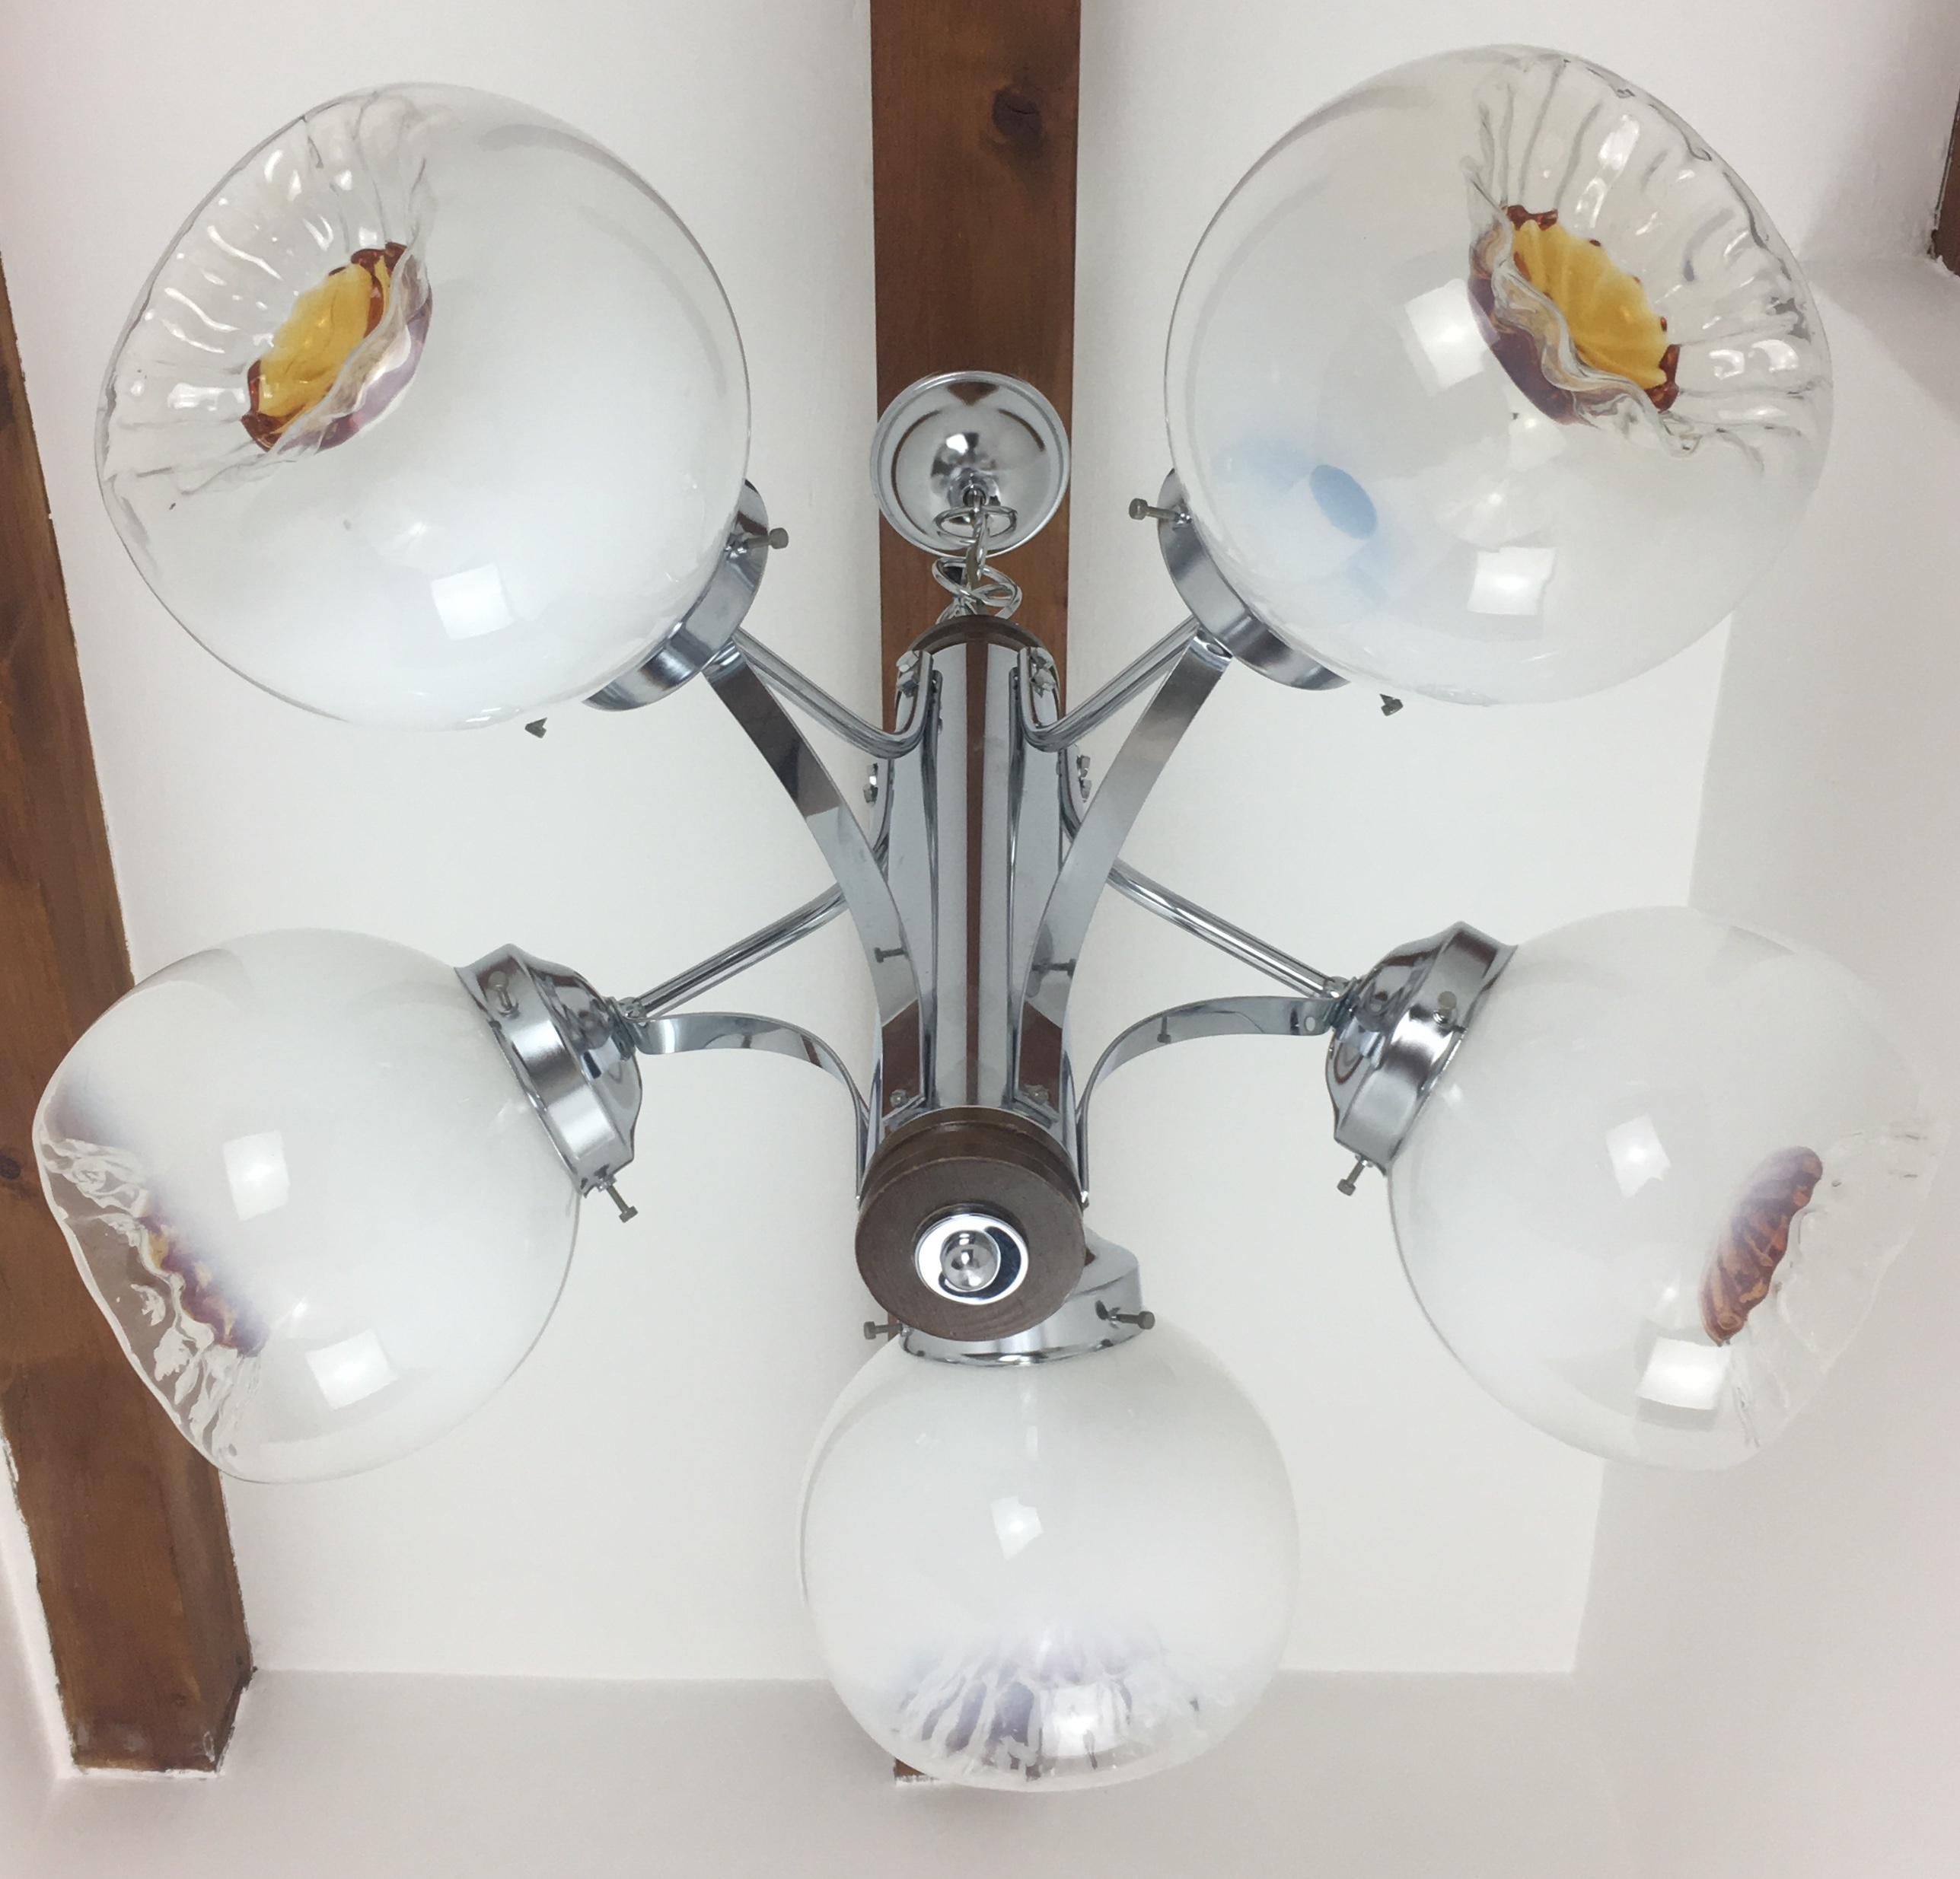 Midcentury chandelier pendant by Italian designer Carlo Nason for Mazzega, featuring his signature white to amber artistic hand blown glass globes. Five Murano glass balls surrounded by curved chrome tubes and connected by on a long chrome pole